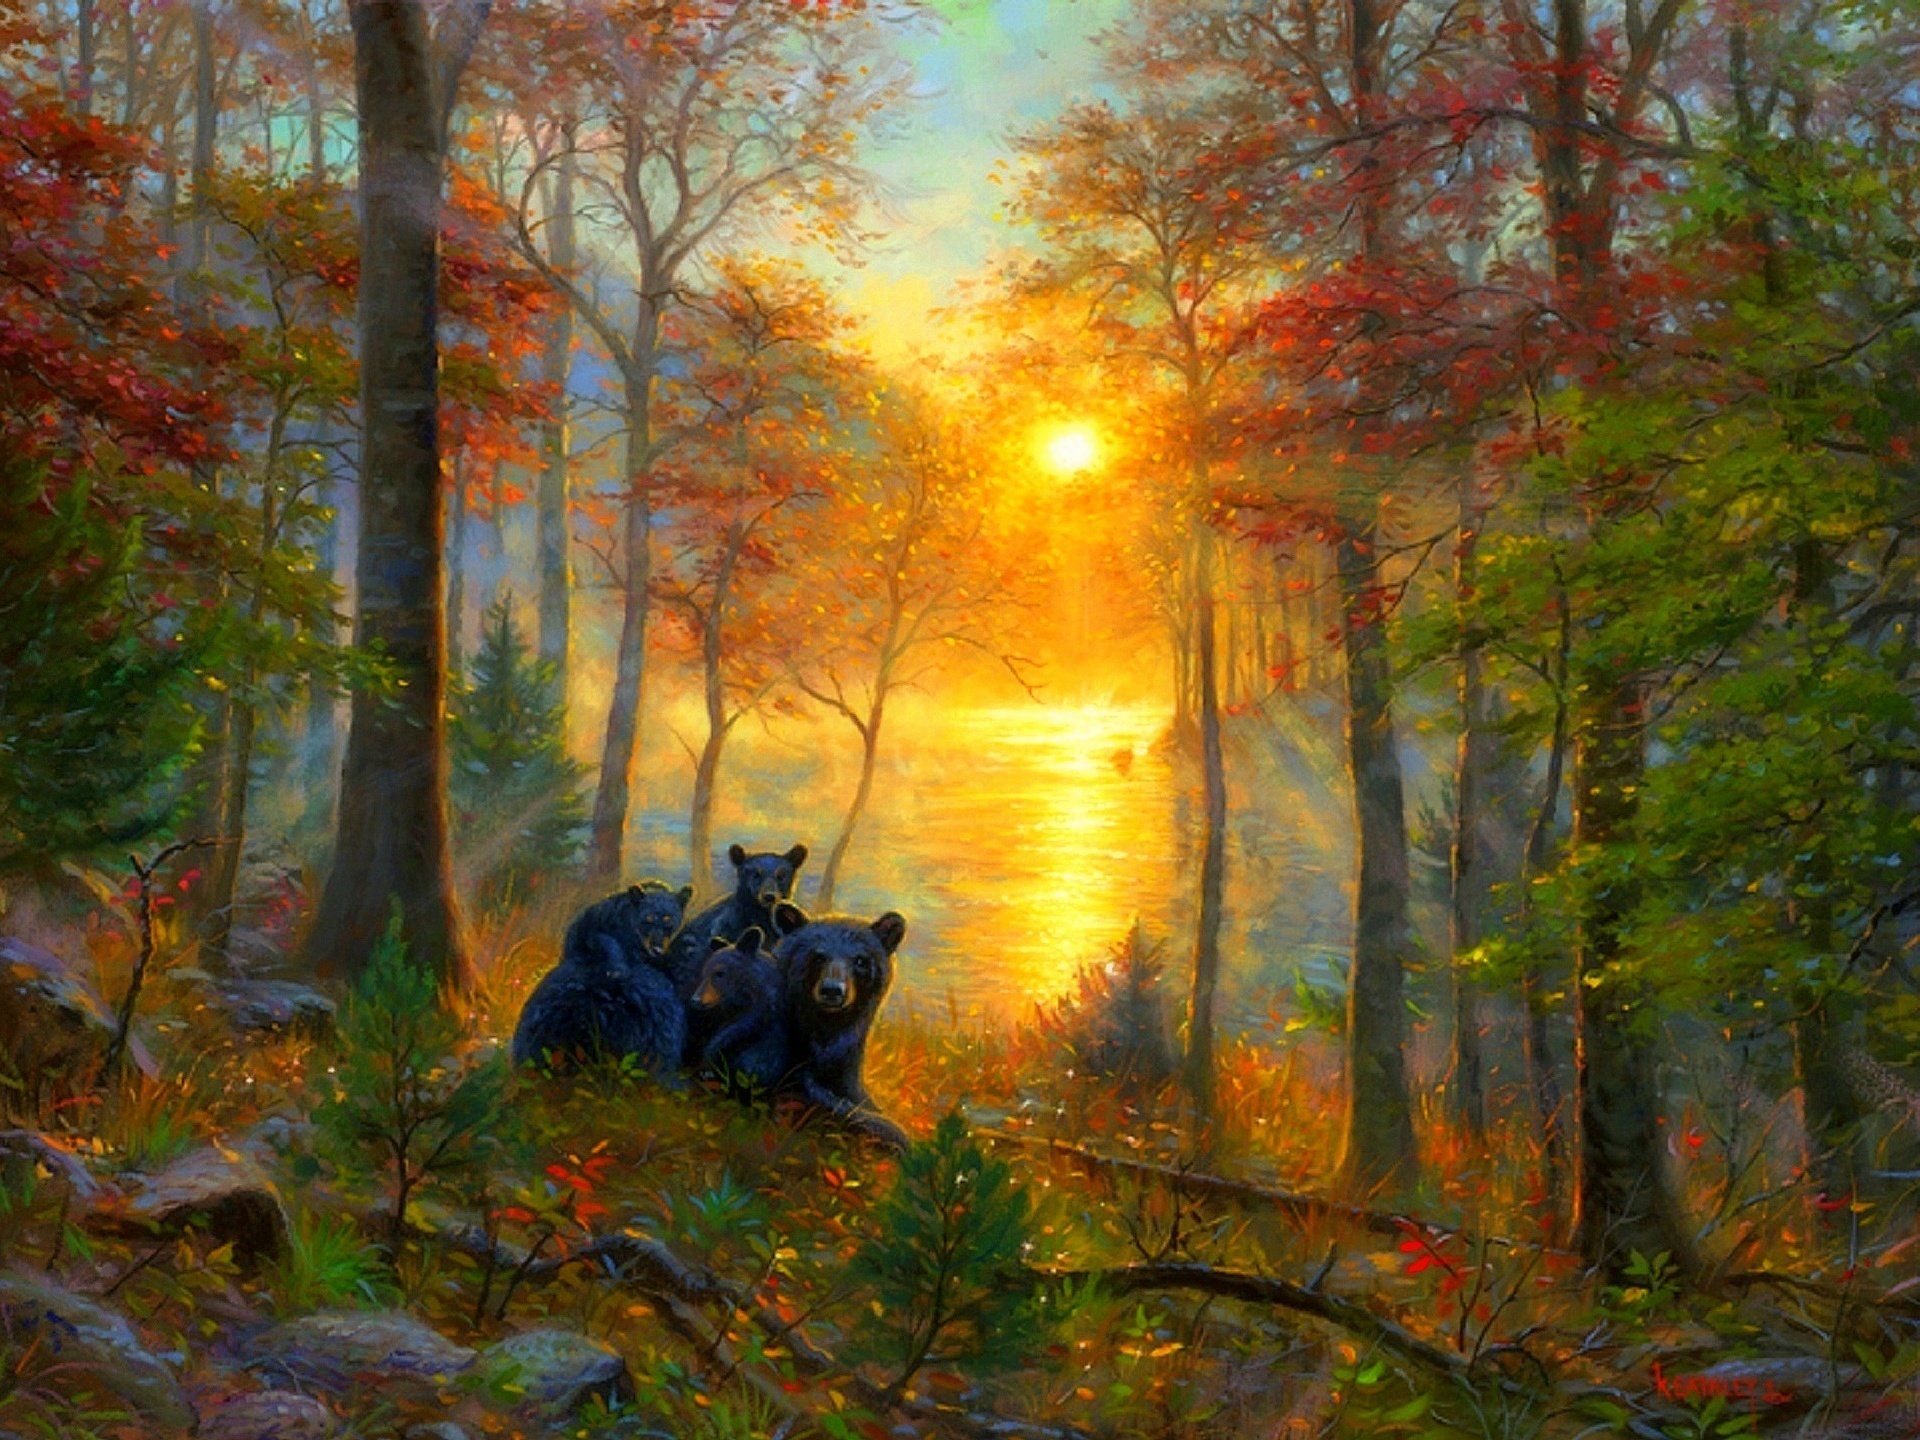 Family of Bears in Autumn Woods HD Wallpaper. Background Image